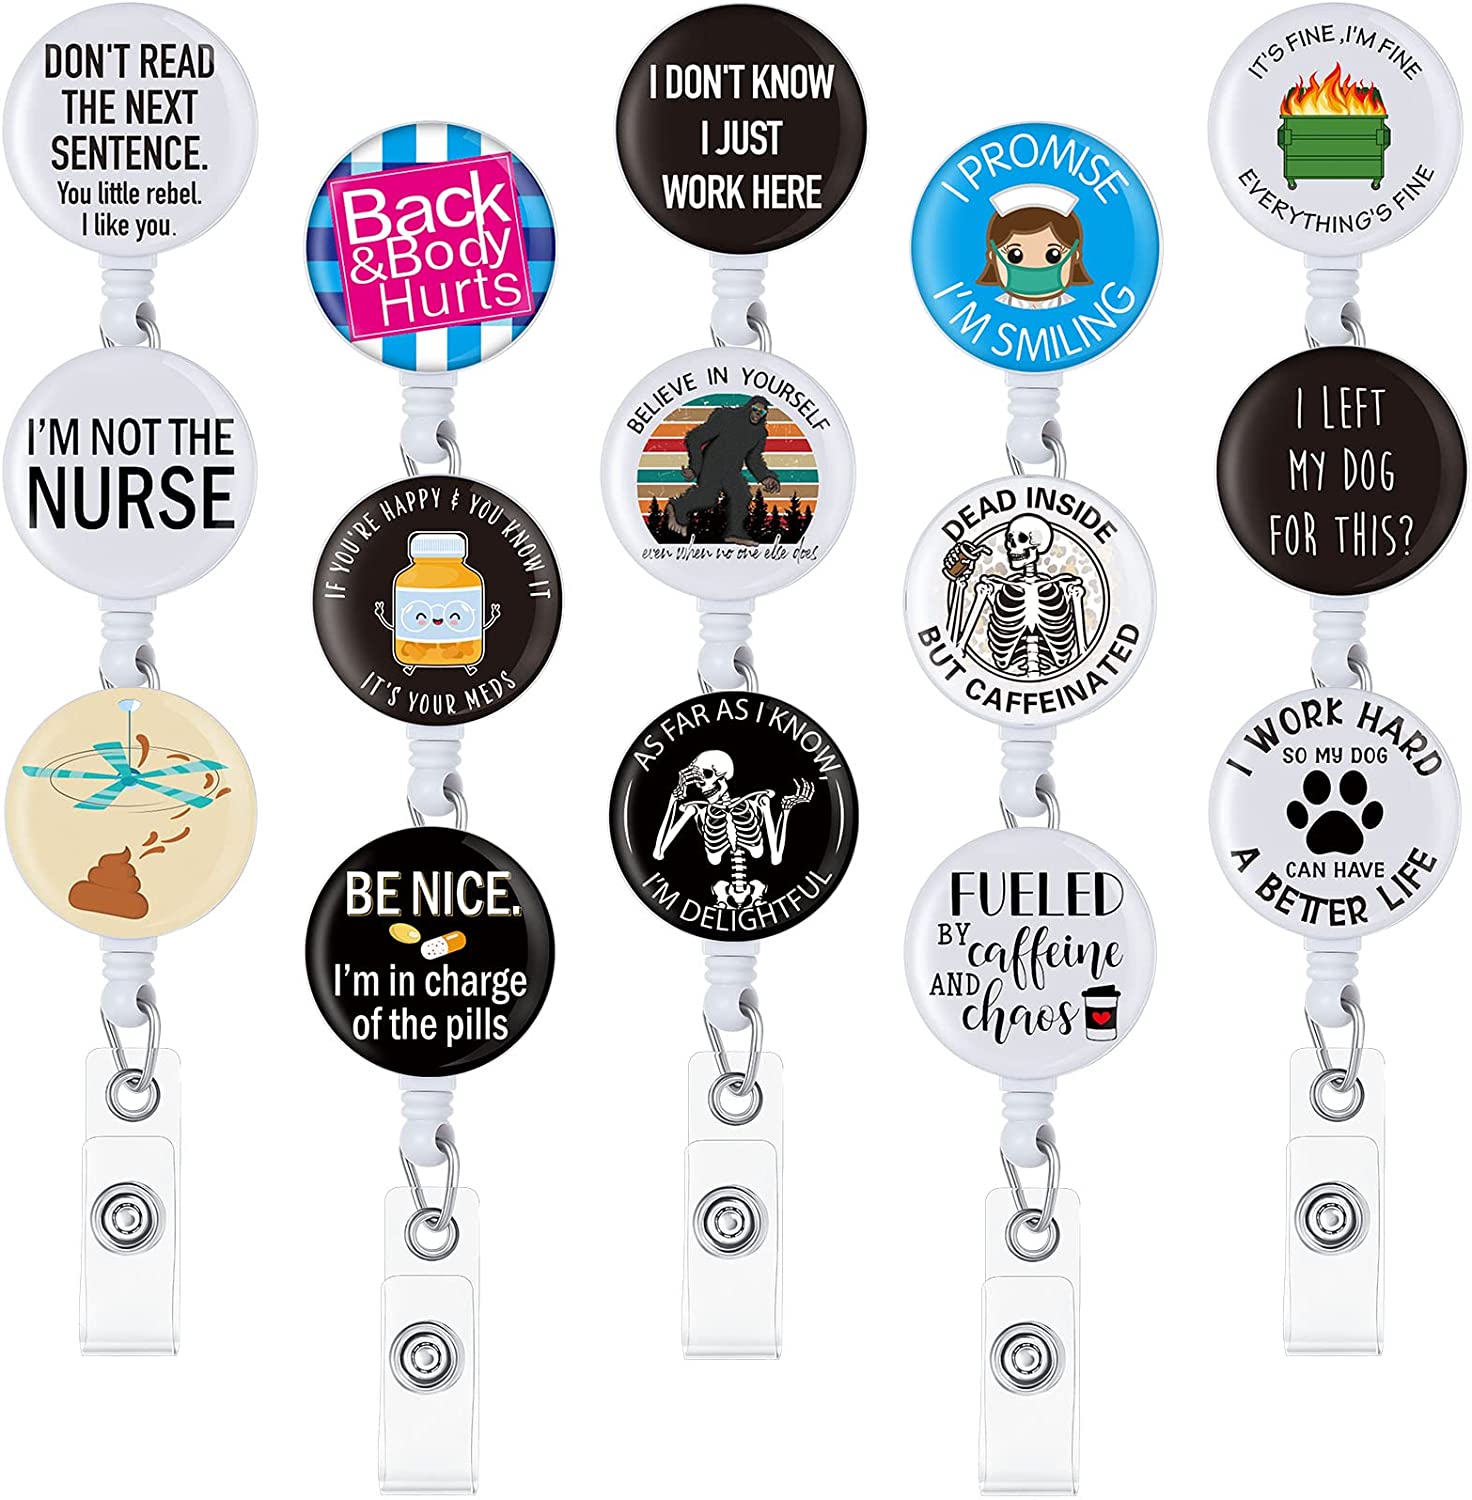 Brown Hair Medical Professional in Scrubs (RN, LPN, MD, etc) - Retractable Badge Reel with Swivel Clip and Extra-Long 34 inch Cord - Badge Holder